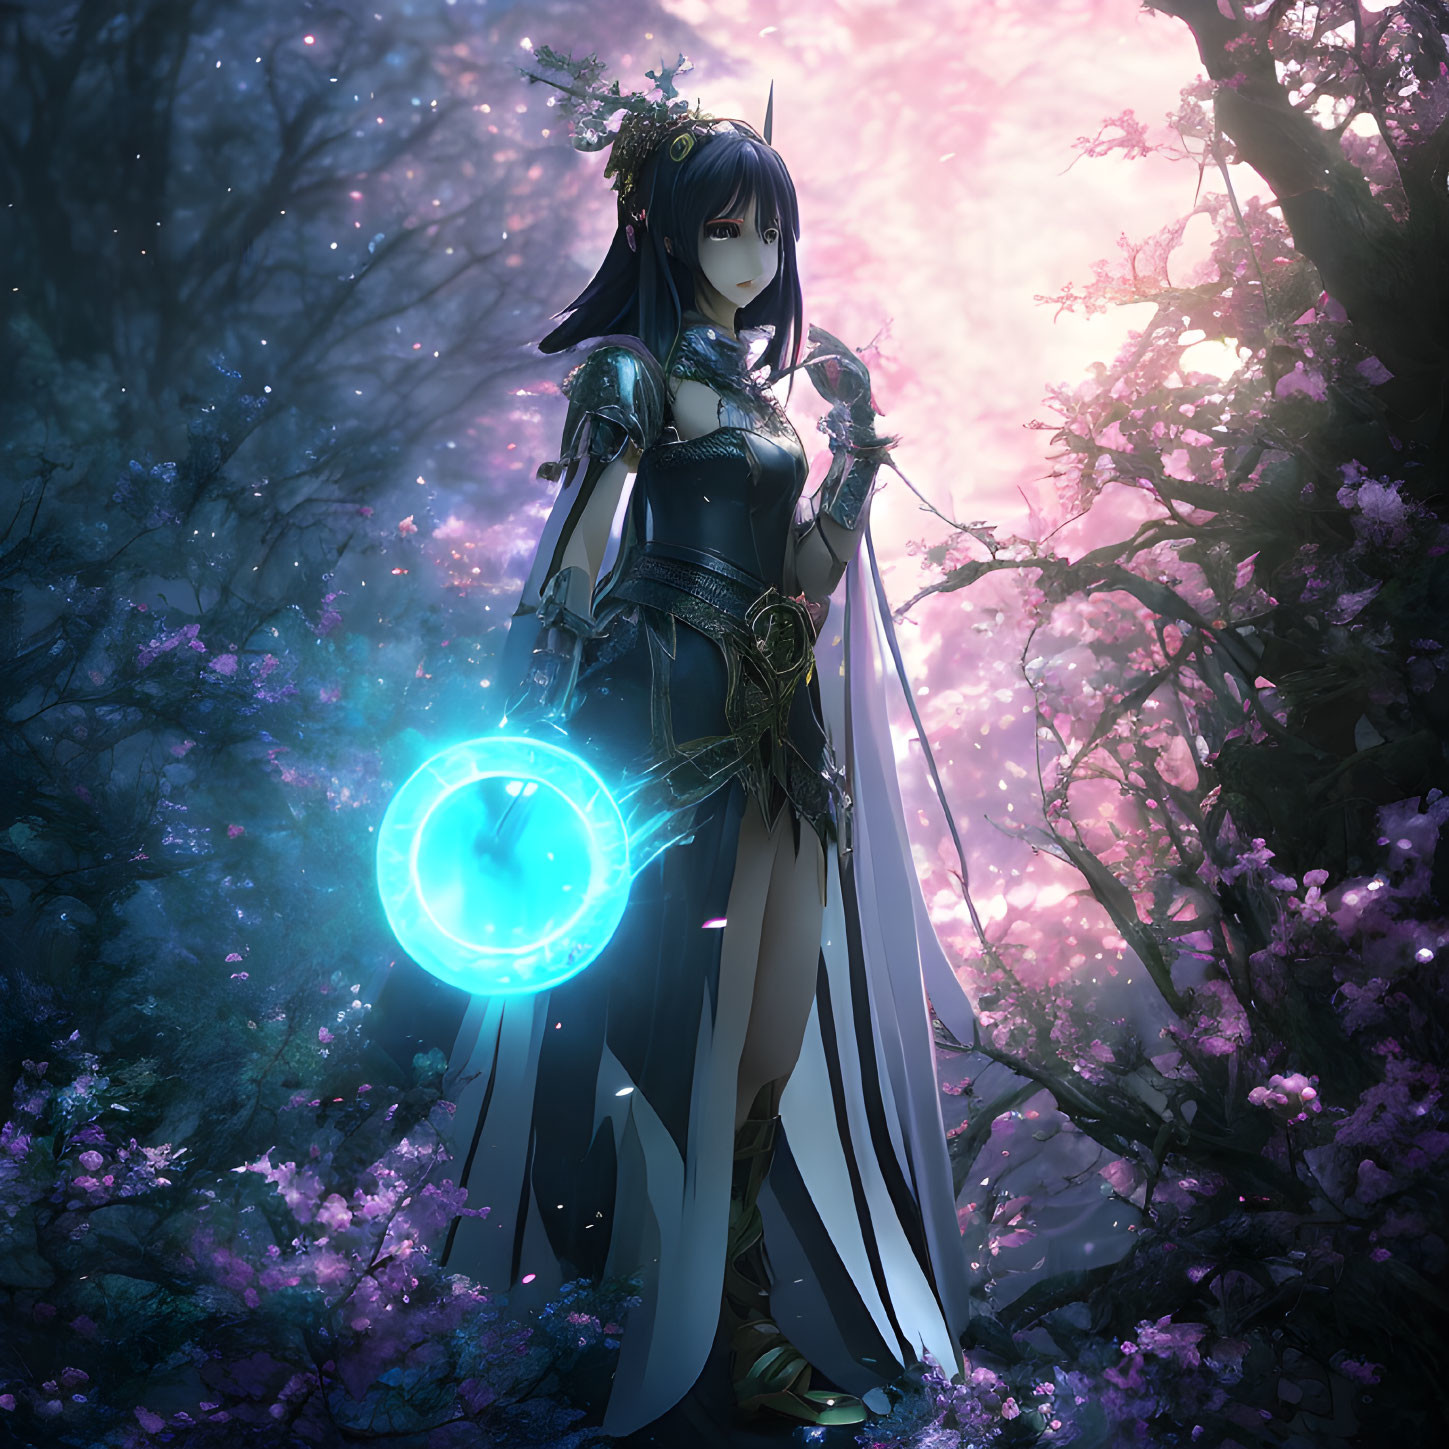 Mystical warrior woman with long dark hair in glowing purple forest holding magical blue disc